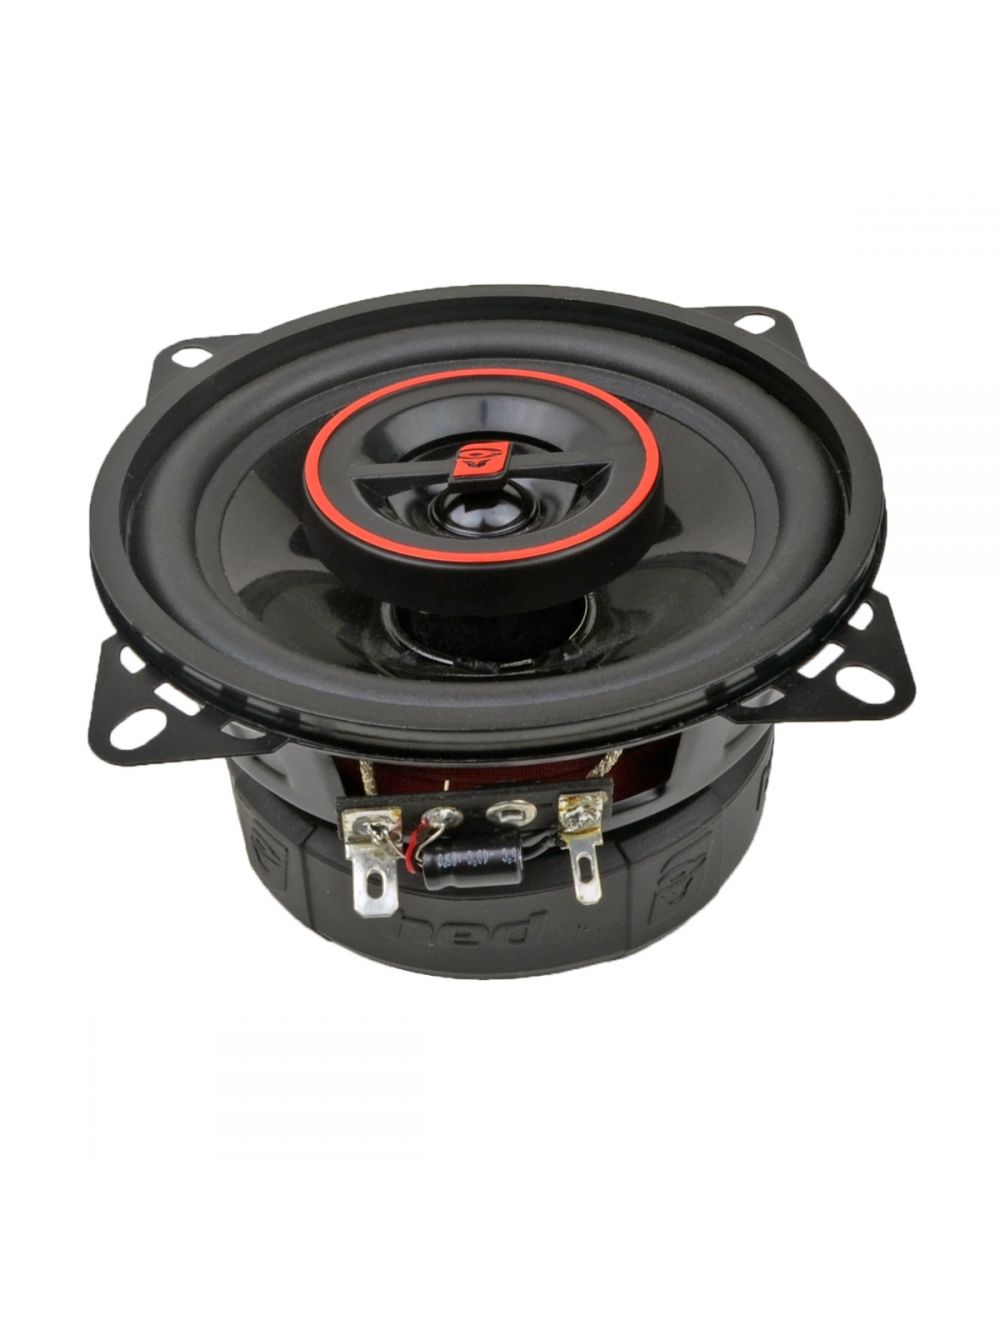 Cerwin-Vega Mobile H740 Hed Series 2-Way Coaxial Speakers R 4", 275 Watts Max